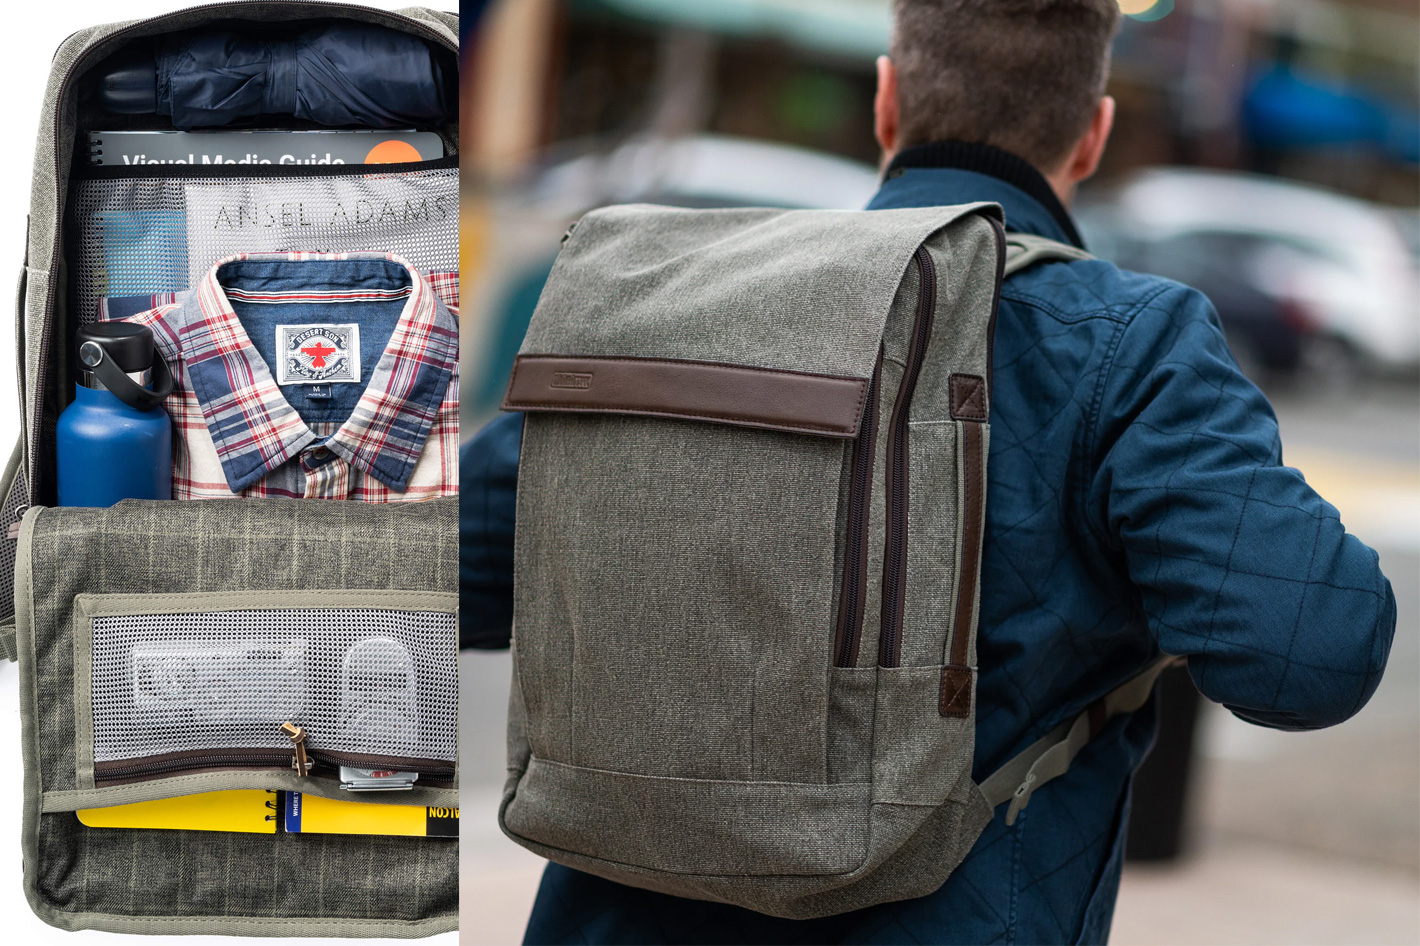 Retrospective EDC Backpack, a solution for everyday use 4